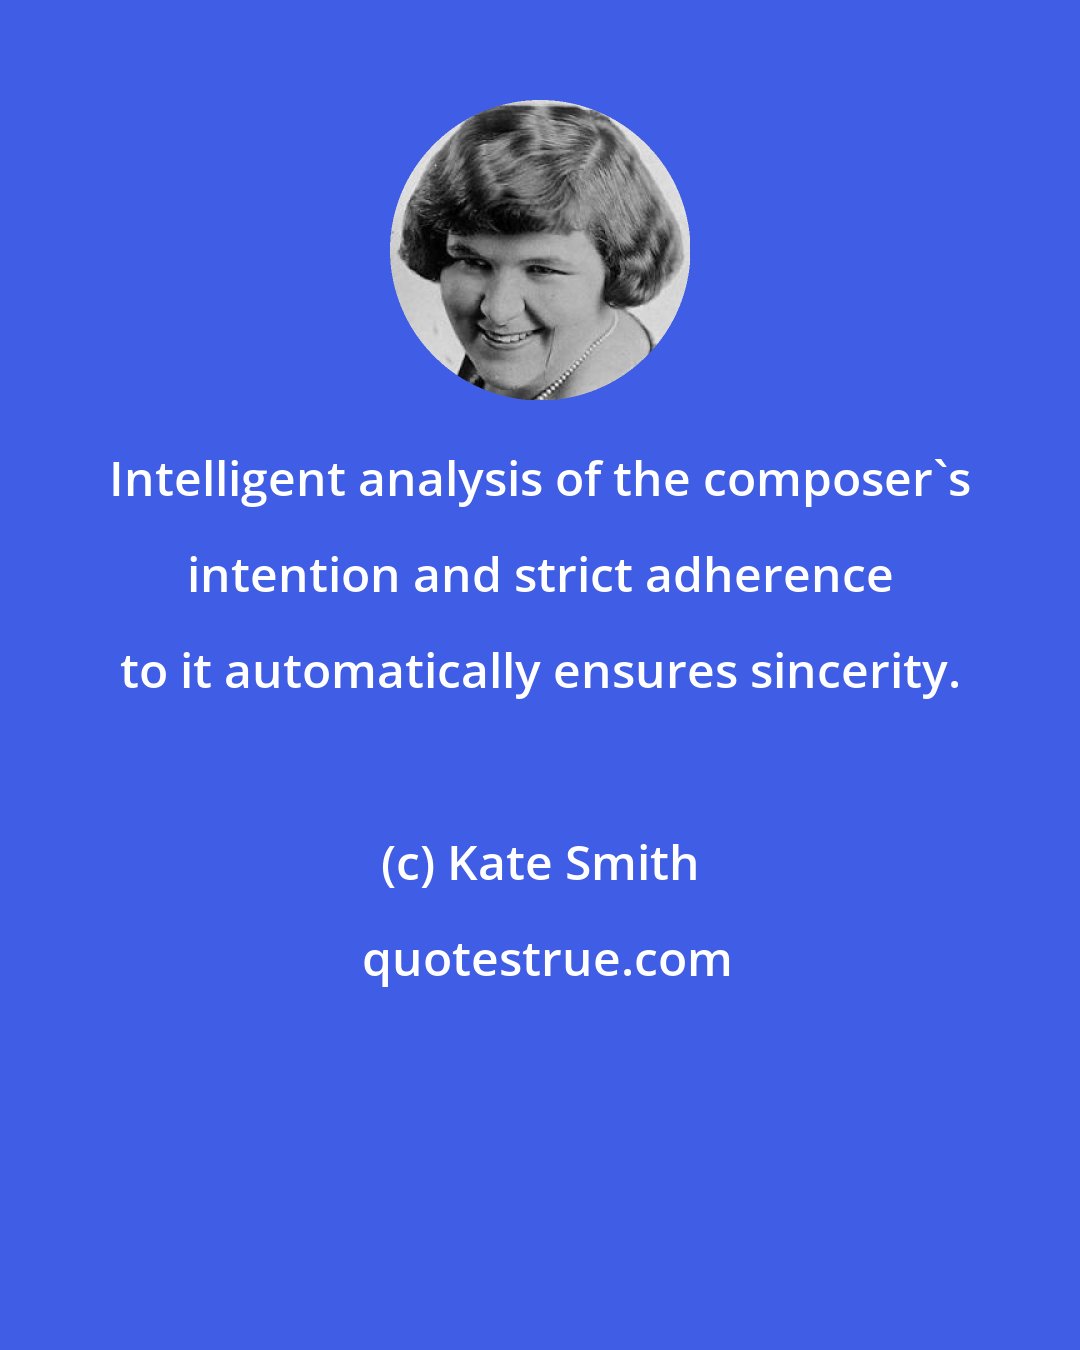 Kate Smith: Intelligent analysis of the composer's intention and strict adherence to it automatically ensures sincerity.